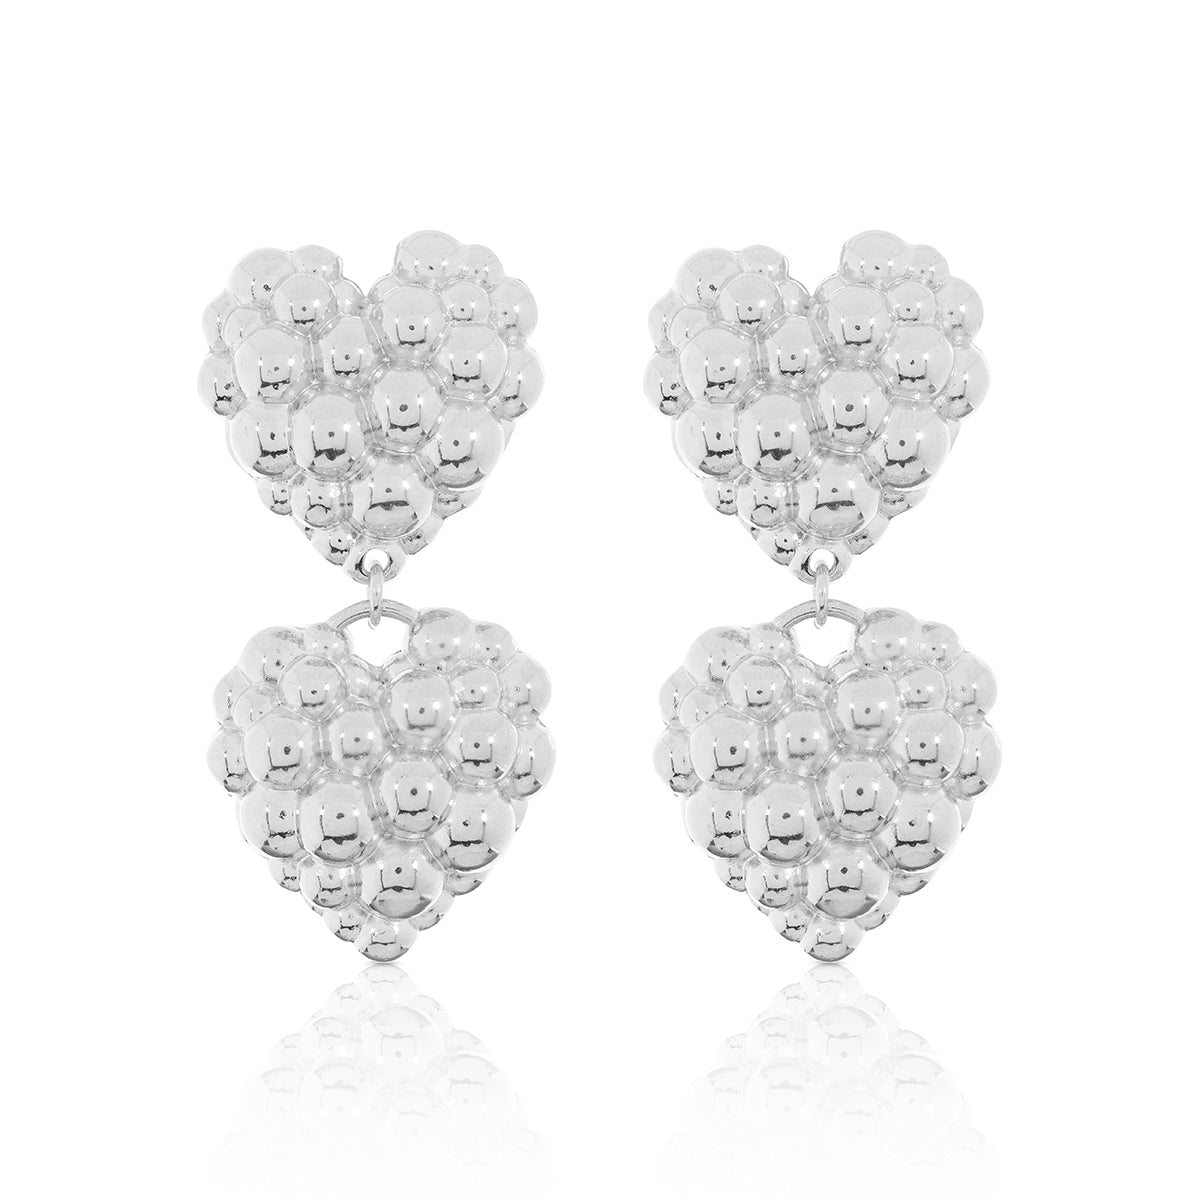 DOUBLE LOVE EARRING - LARGE SILVER